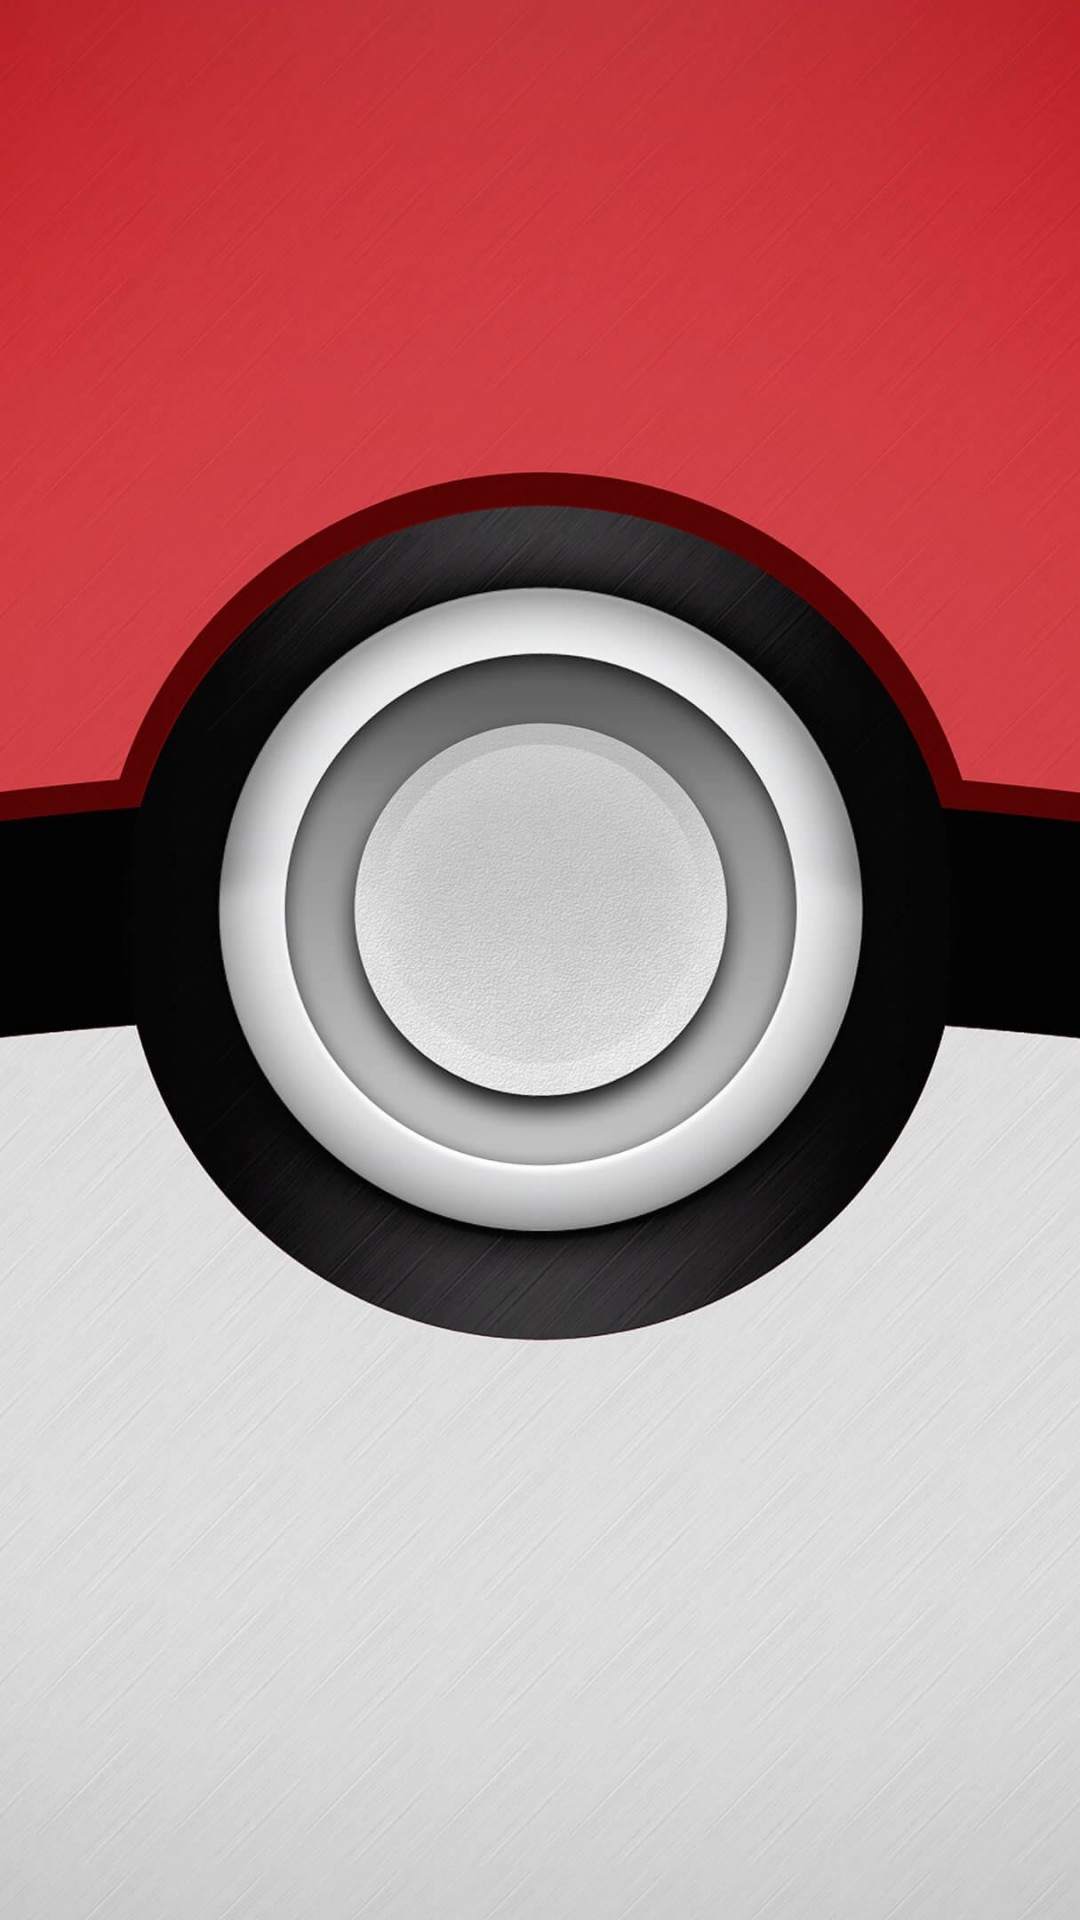 Pokeball Wallpaper for HTC One